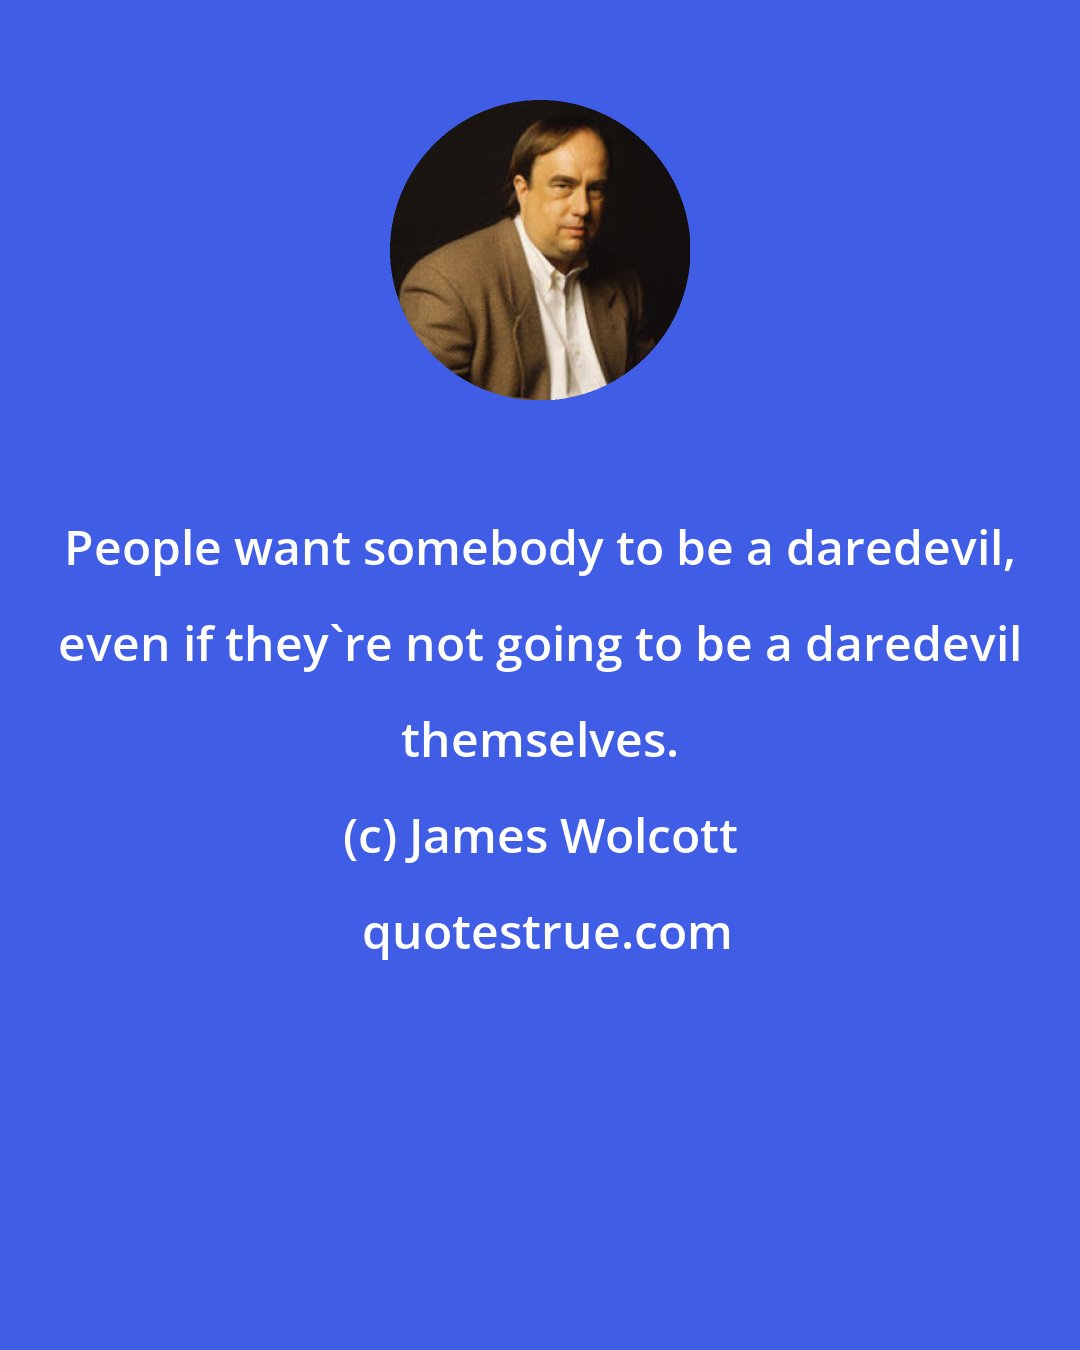 James Wolcott: People want somebody to be a daredevil, even if they're not going to be a daredevil themselves.